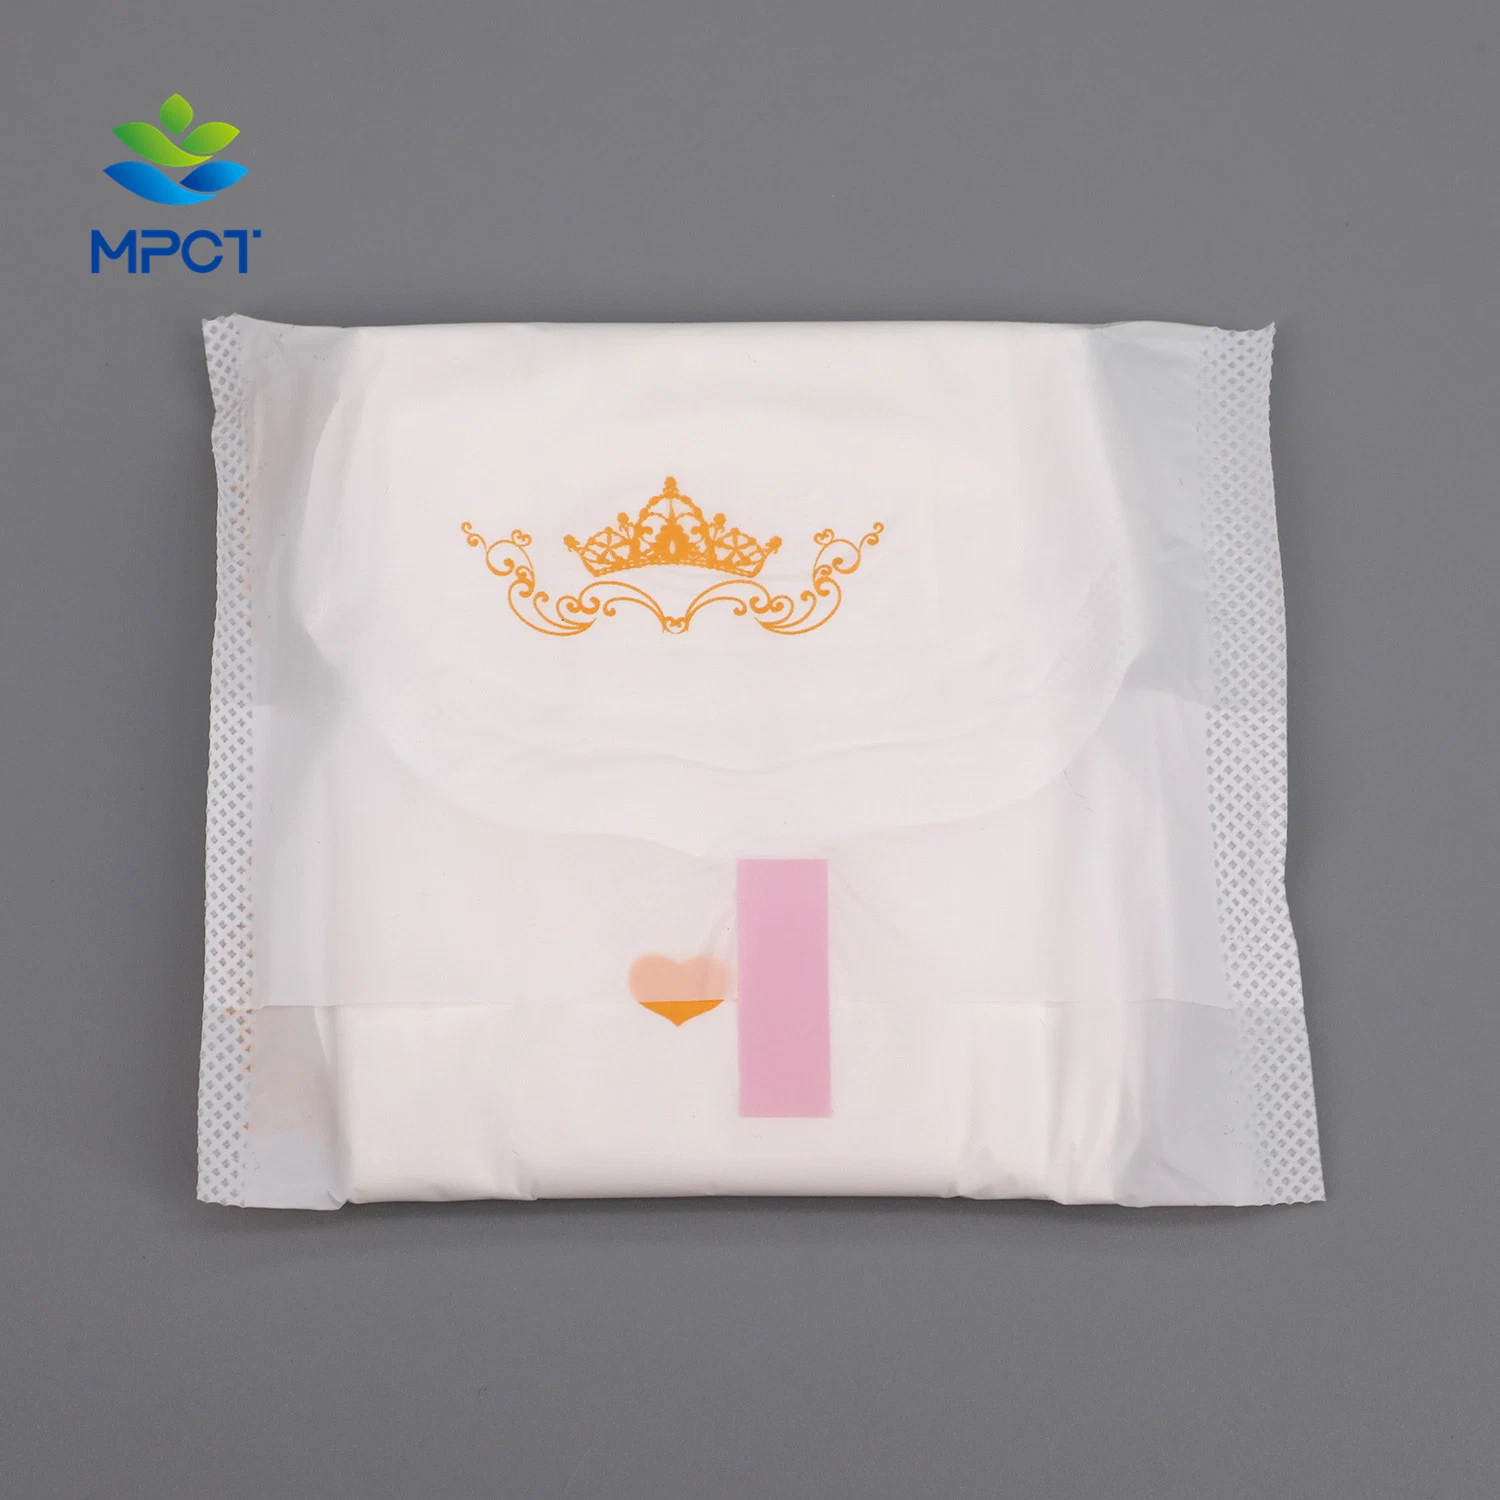 Wholesale/Supplier Manufacturer Sanitary Pads Disposable Sanitary Napkin Bio Herbal Medicated Lady Anion Panty Liner